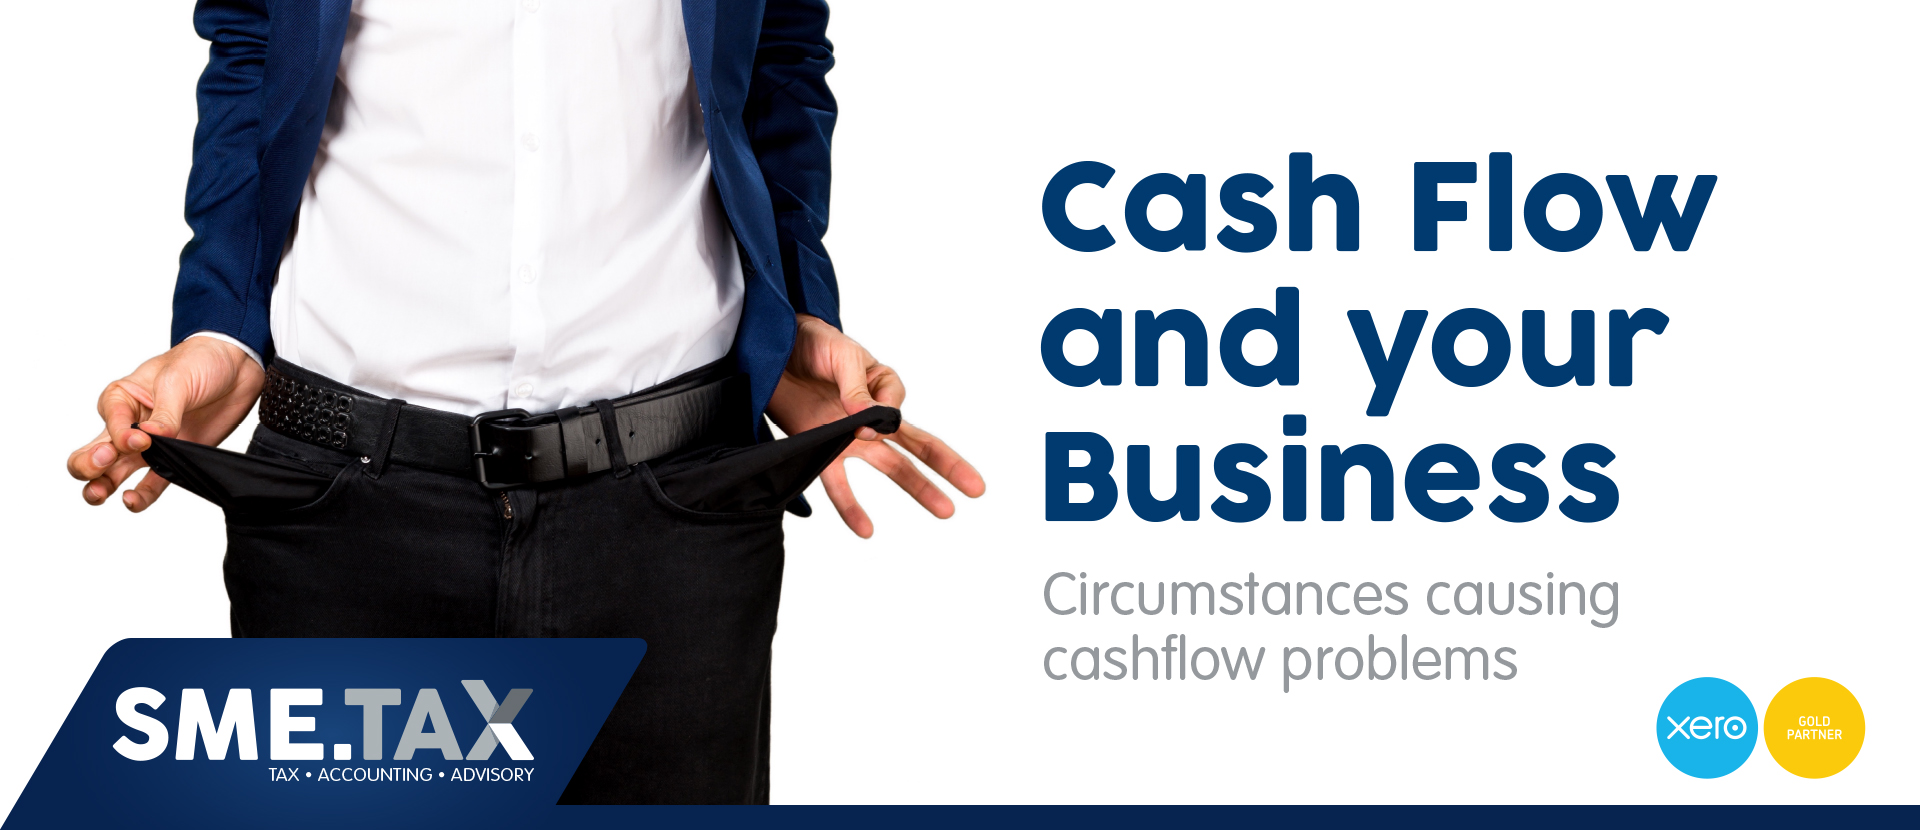 SME.TAX Blog - CashFlow and your business